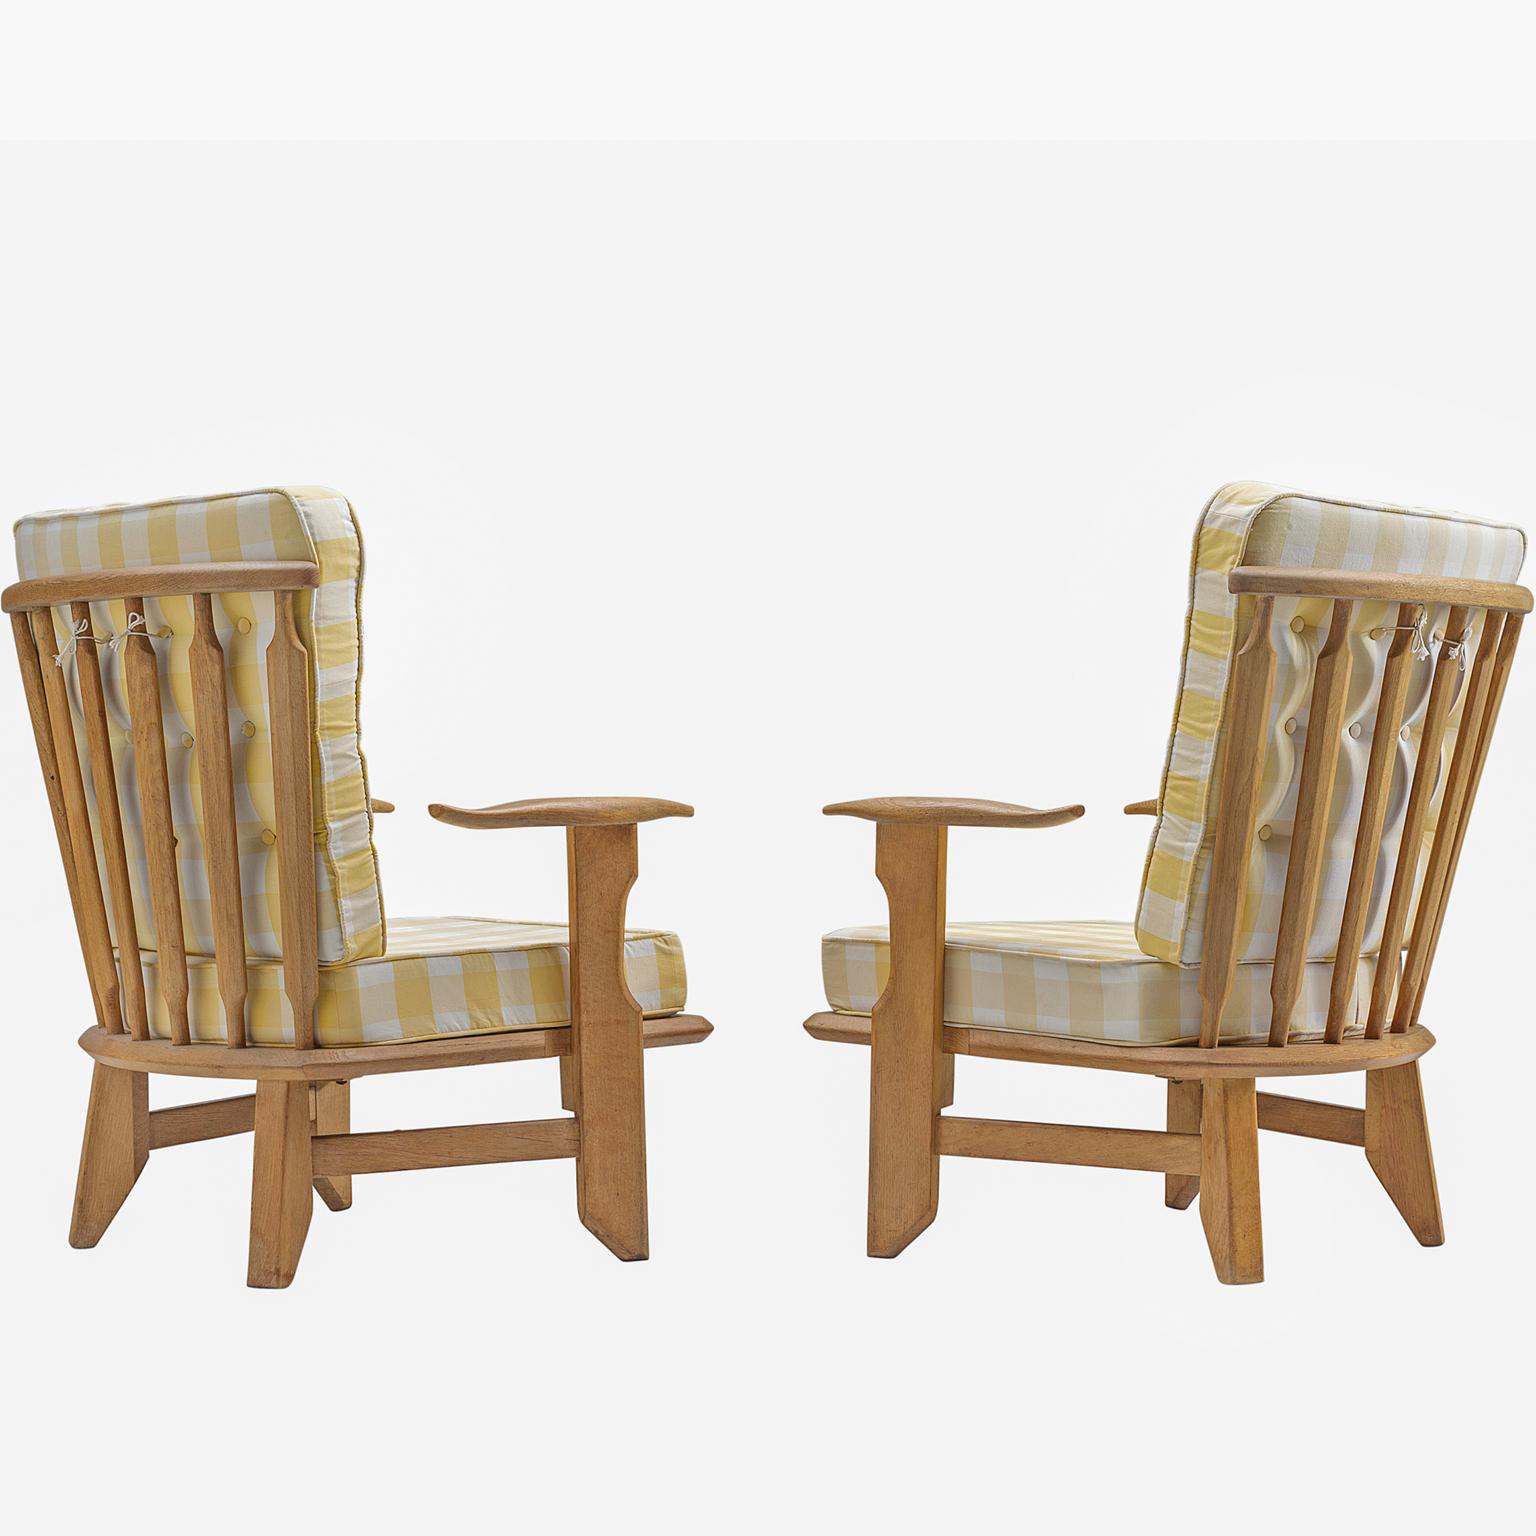 Mid-20th Century Guillerme & Chambron Solid Oak Lounge Chairs with Checked Fabric